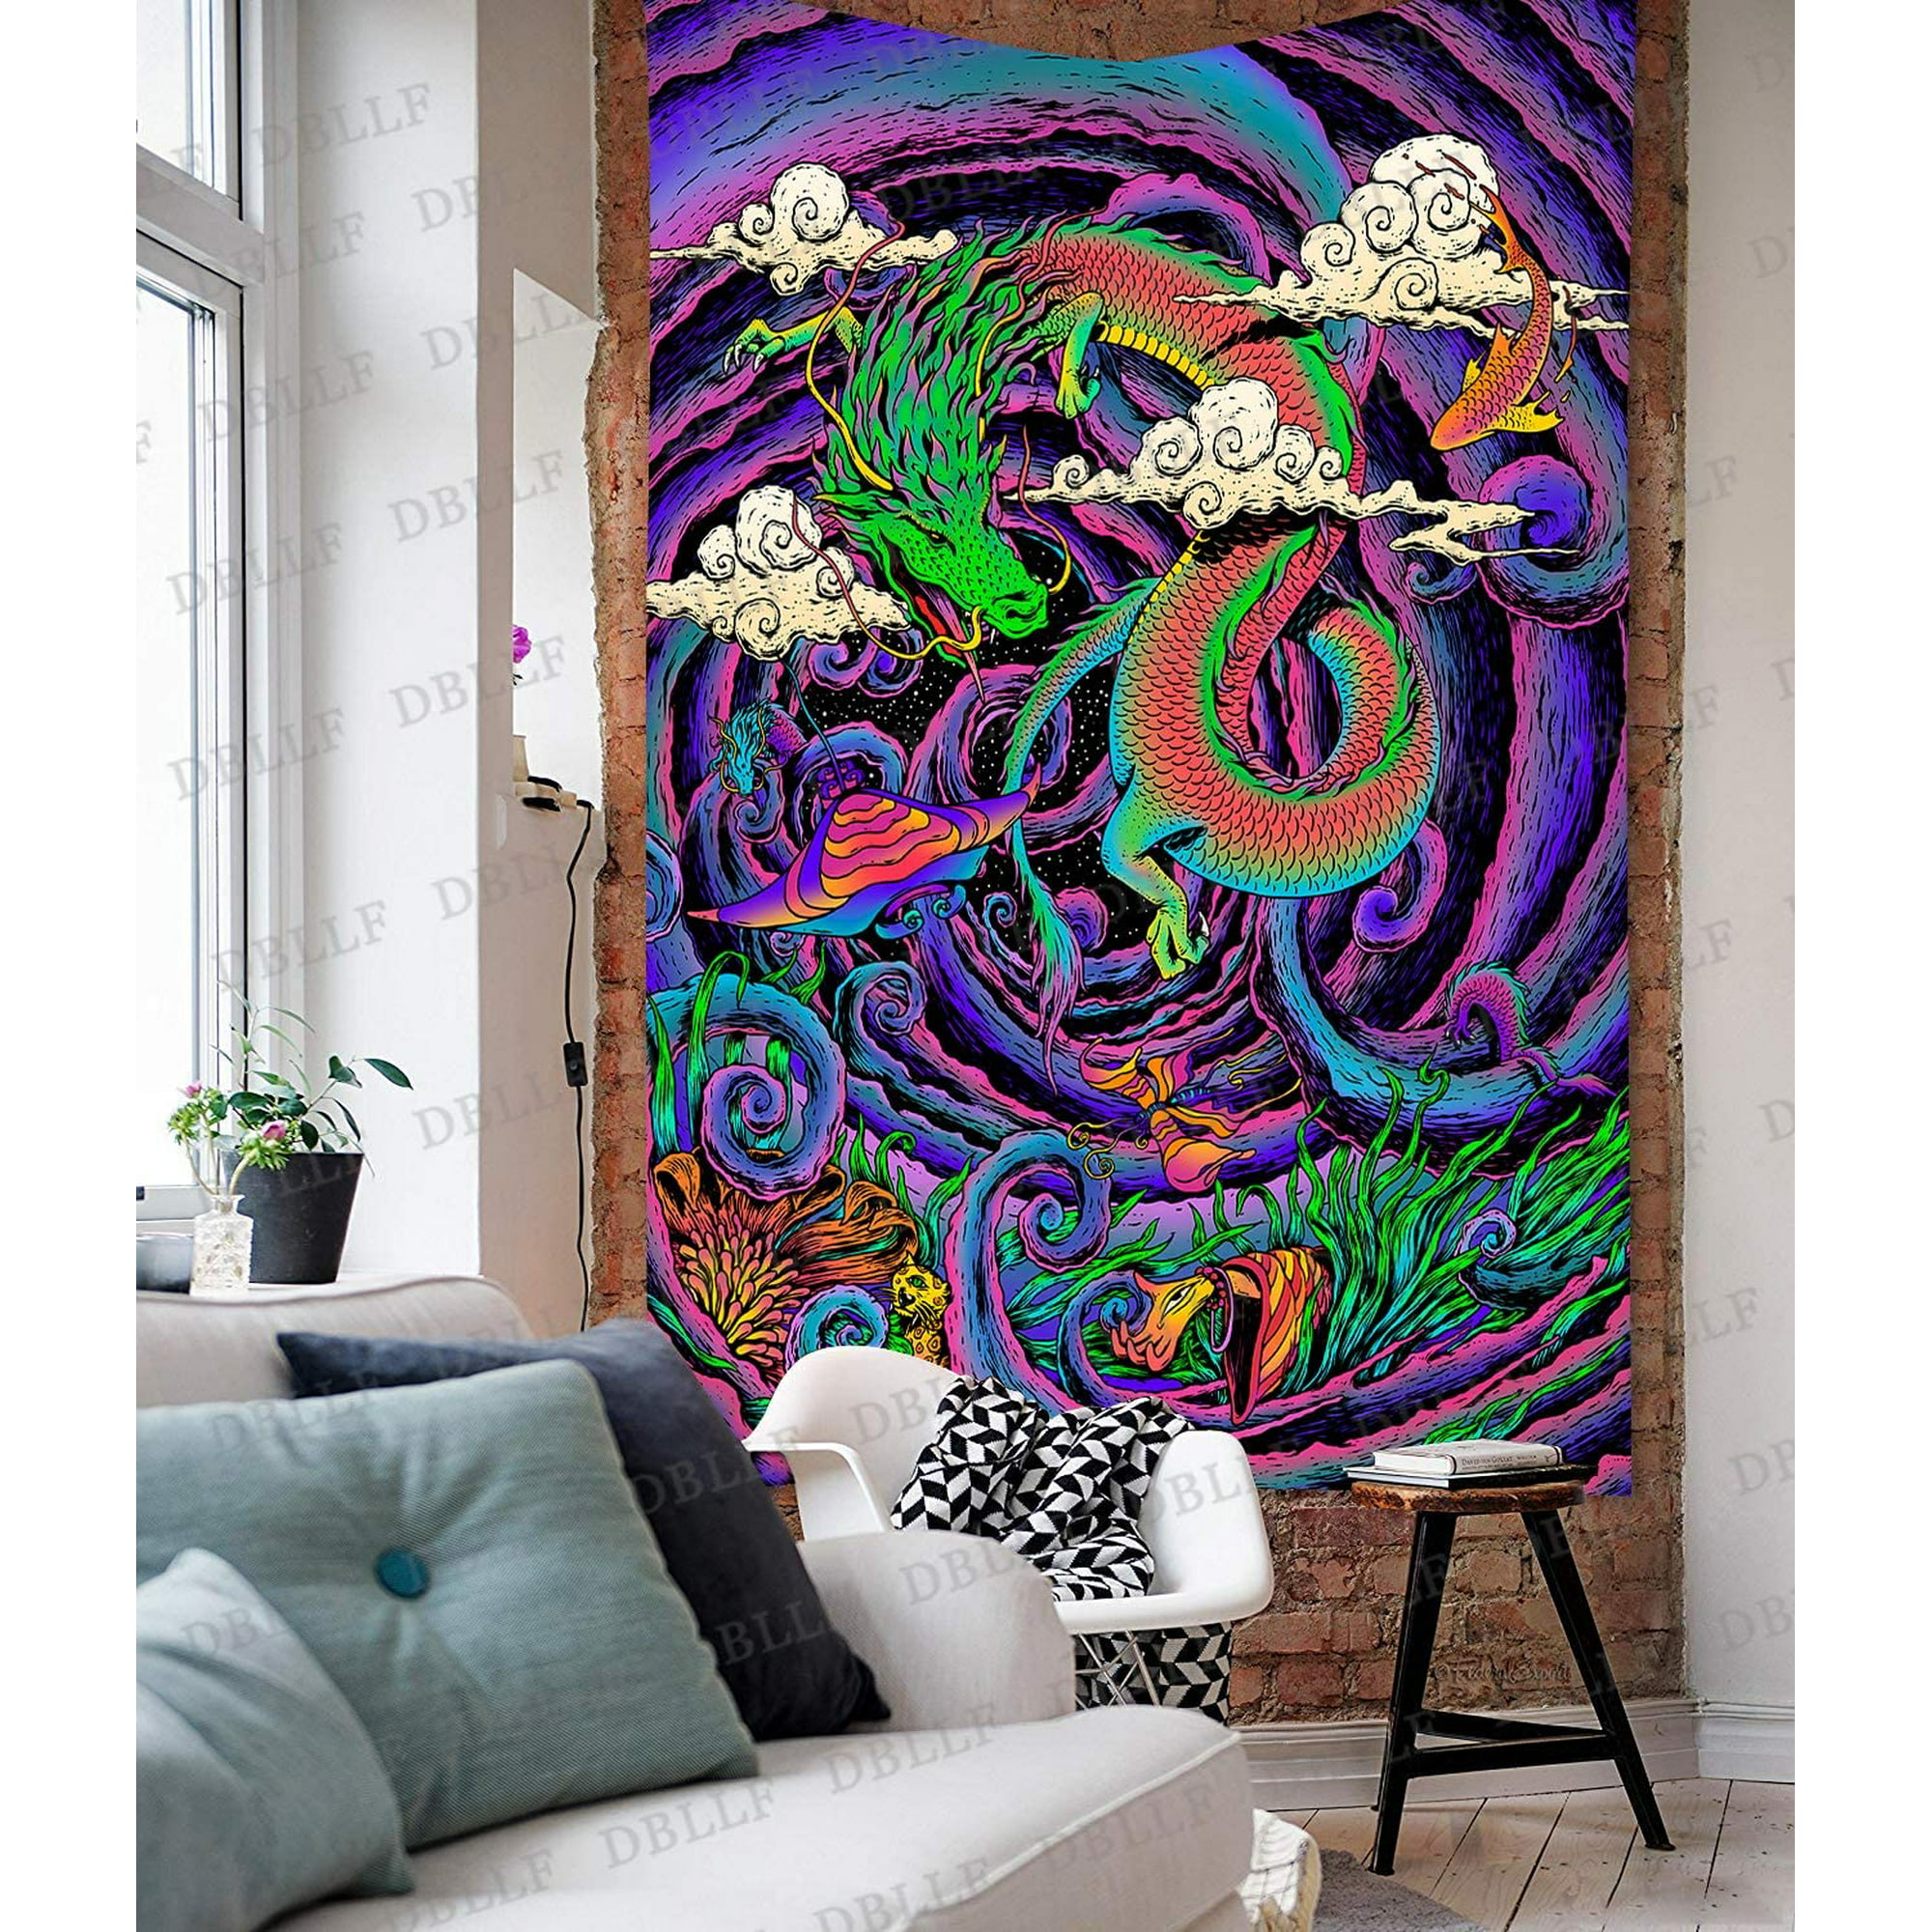 Anime Series Tapestry Psychedelic Dragon Ball Artwork Wall Tapestry Hippie  Art Tapestry Wall Hanging Home Decor 40 x 60 inches for Bedroom Living Room  Dorm Room DBZY1507 | Walmart Canada